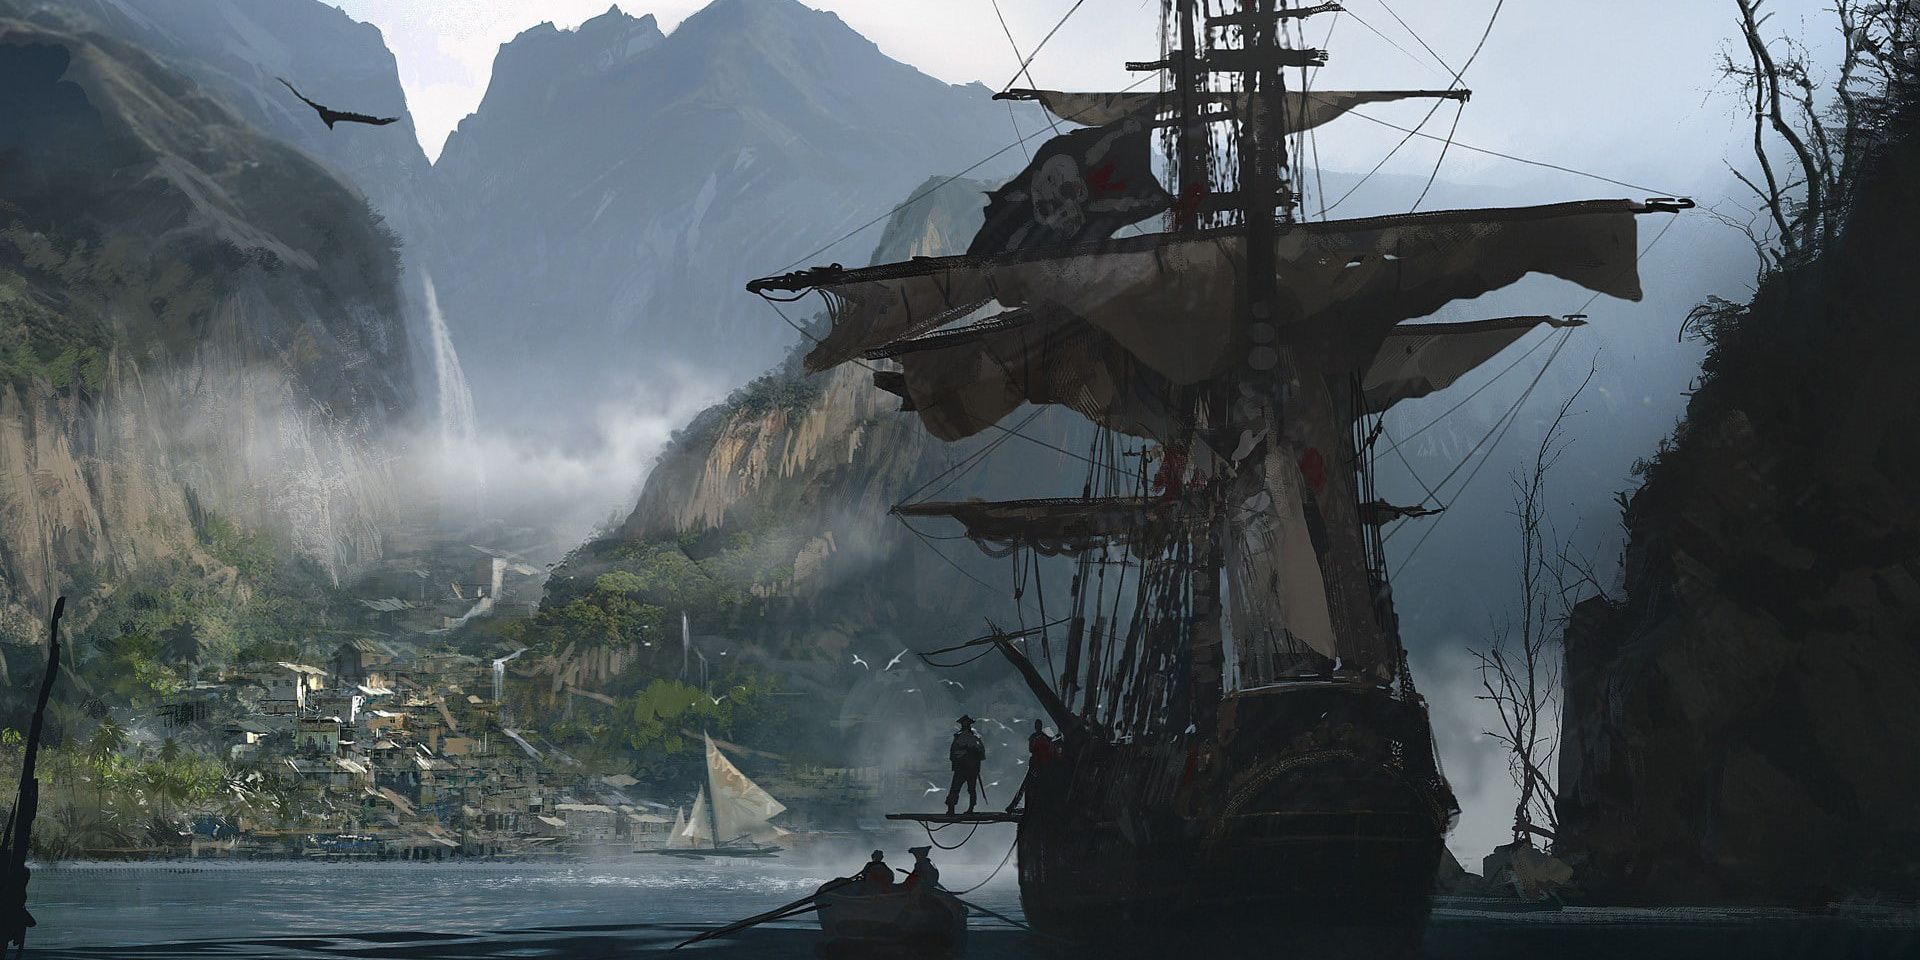 Assassin's Creed Black Flag sequel is coming, but not like you'd think